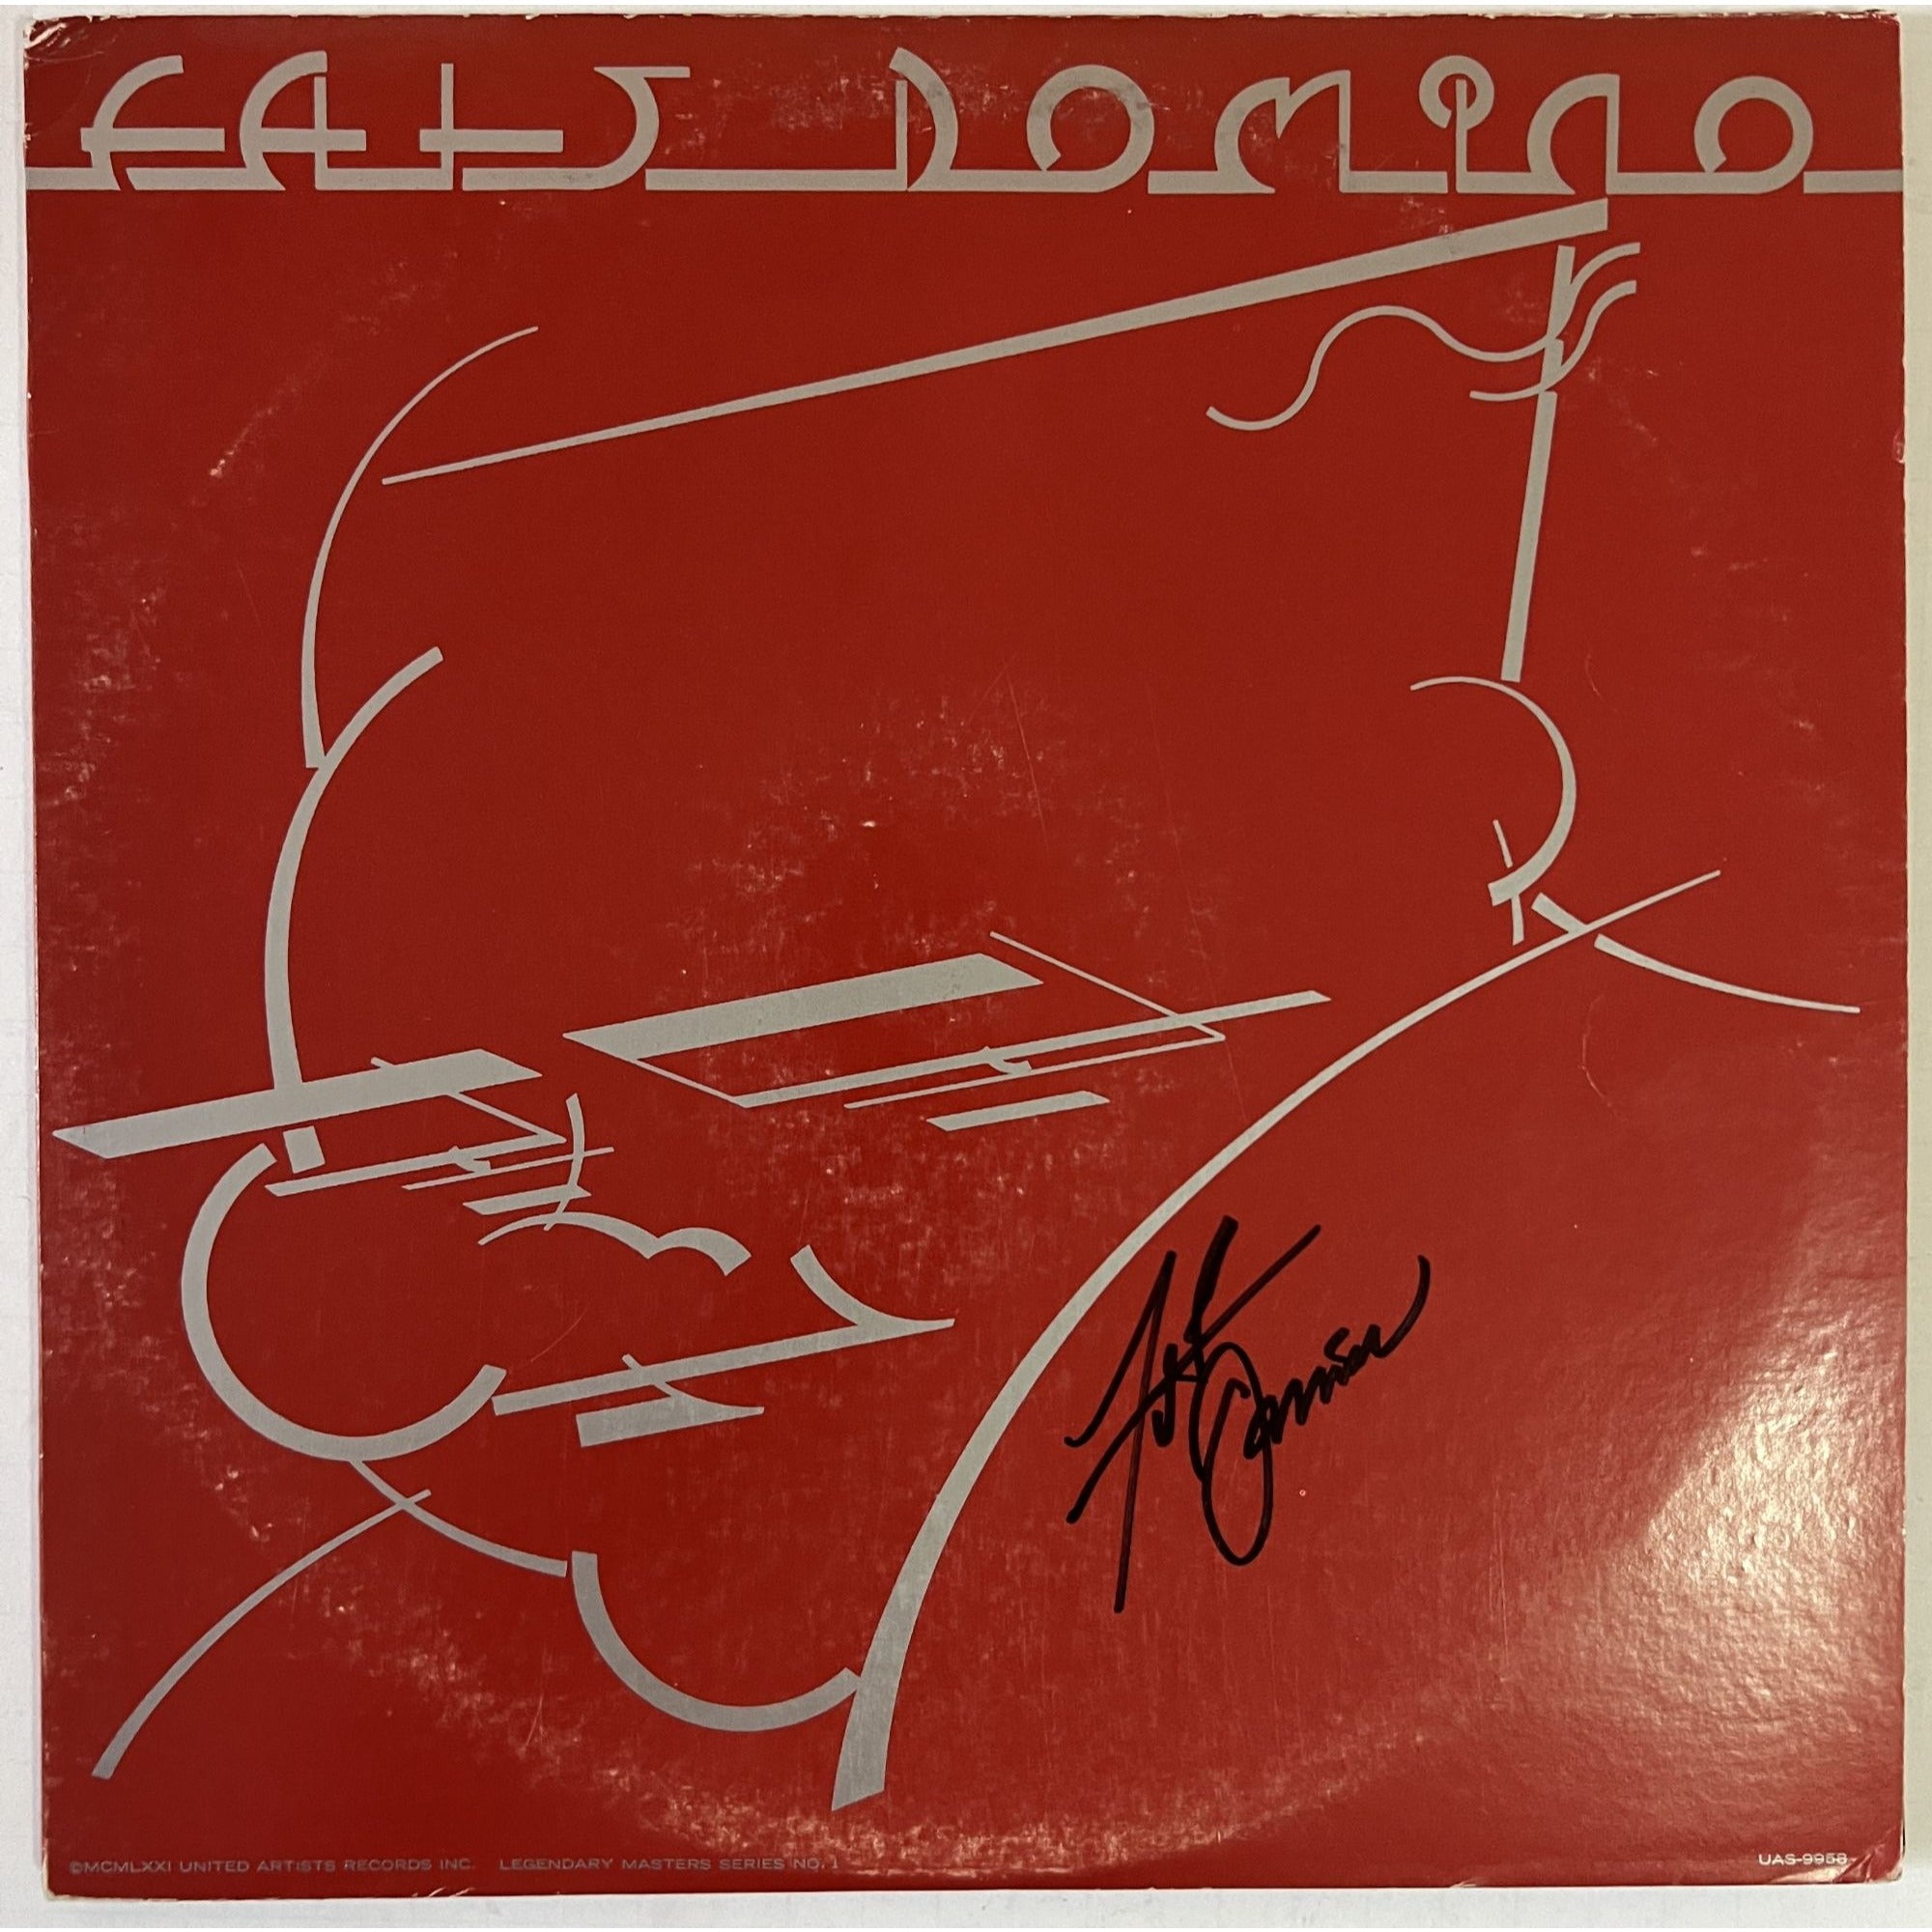 Antoine Domino Jr. "Fats Domino" LP signed with proof